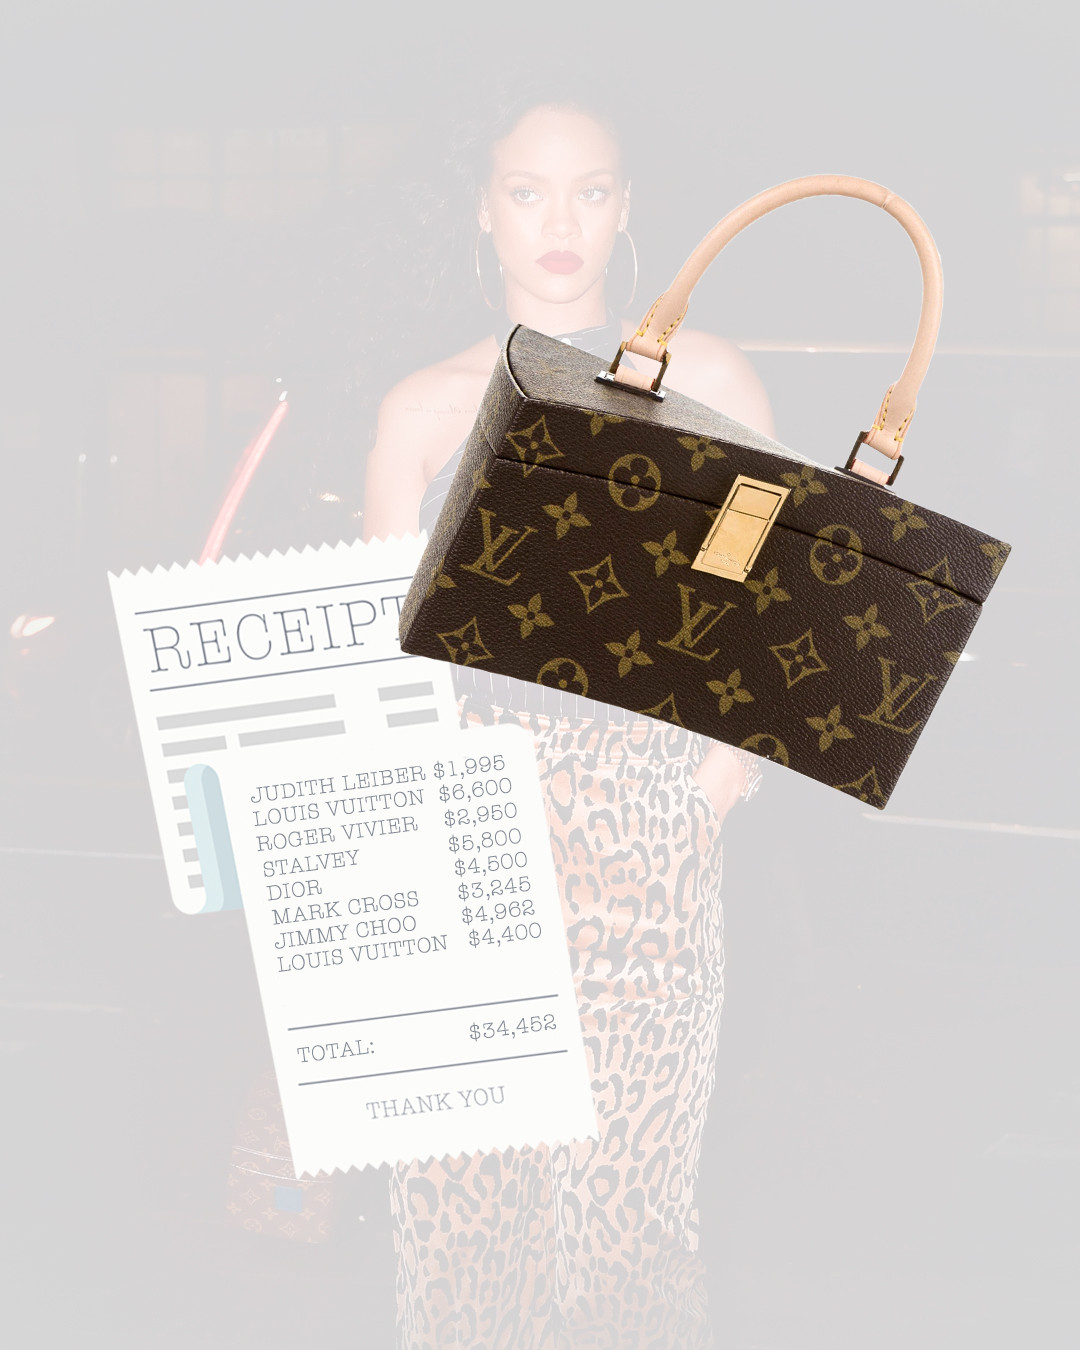 Rihanna Strikes Again With Another Novelty Louis Vuitton Bag